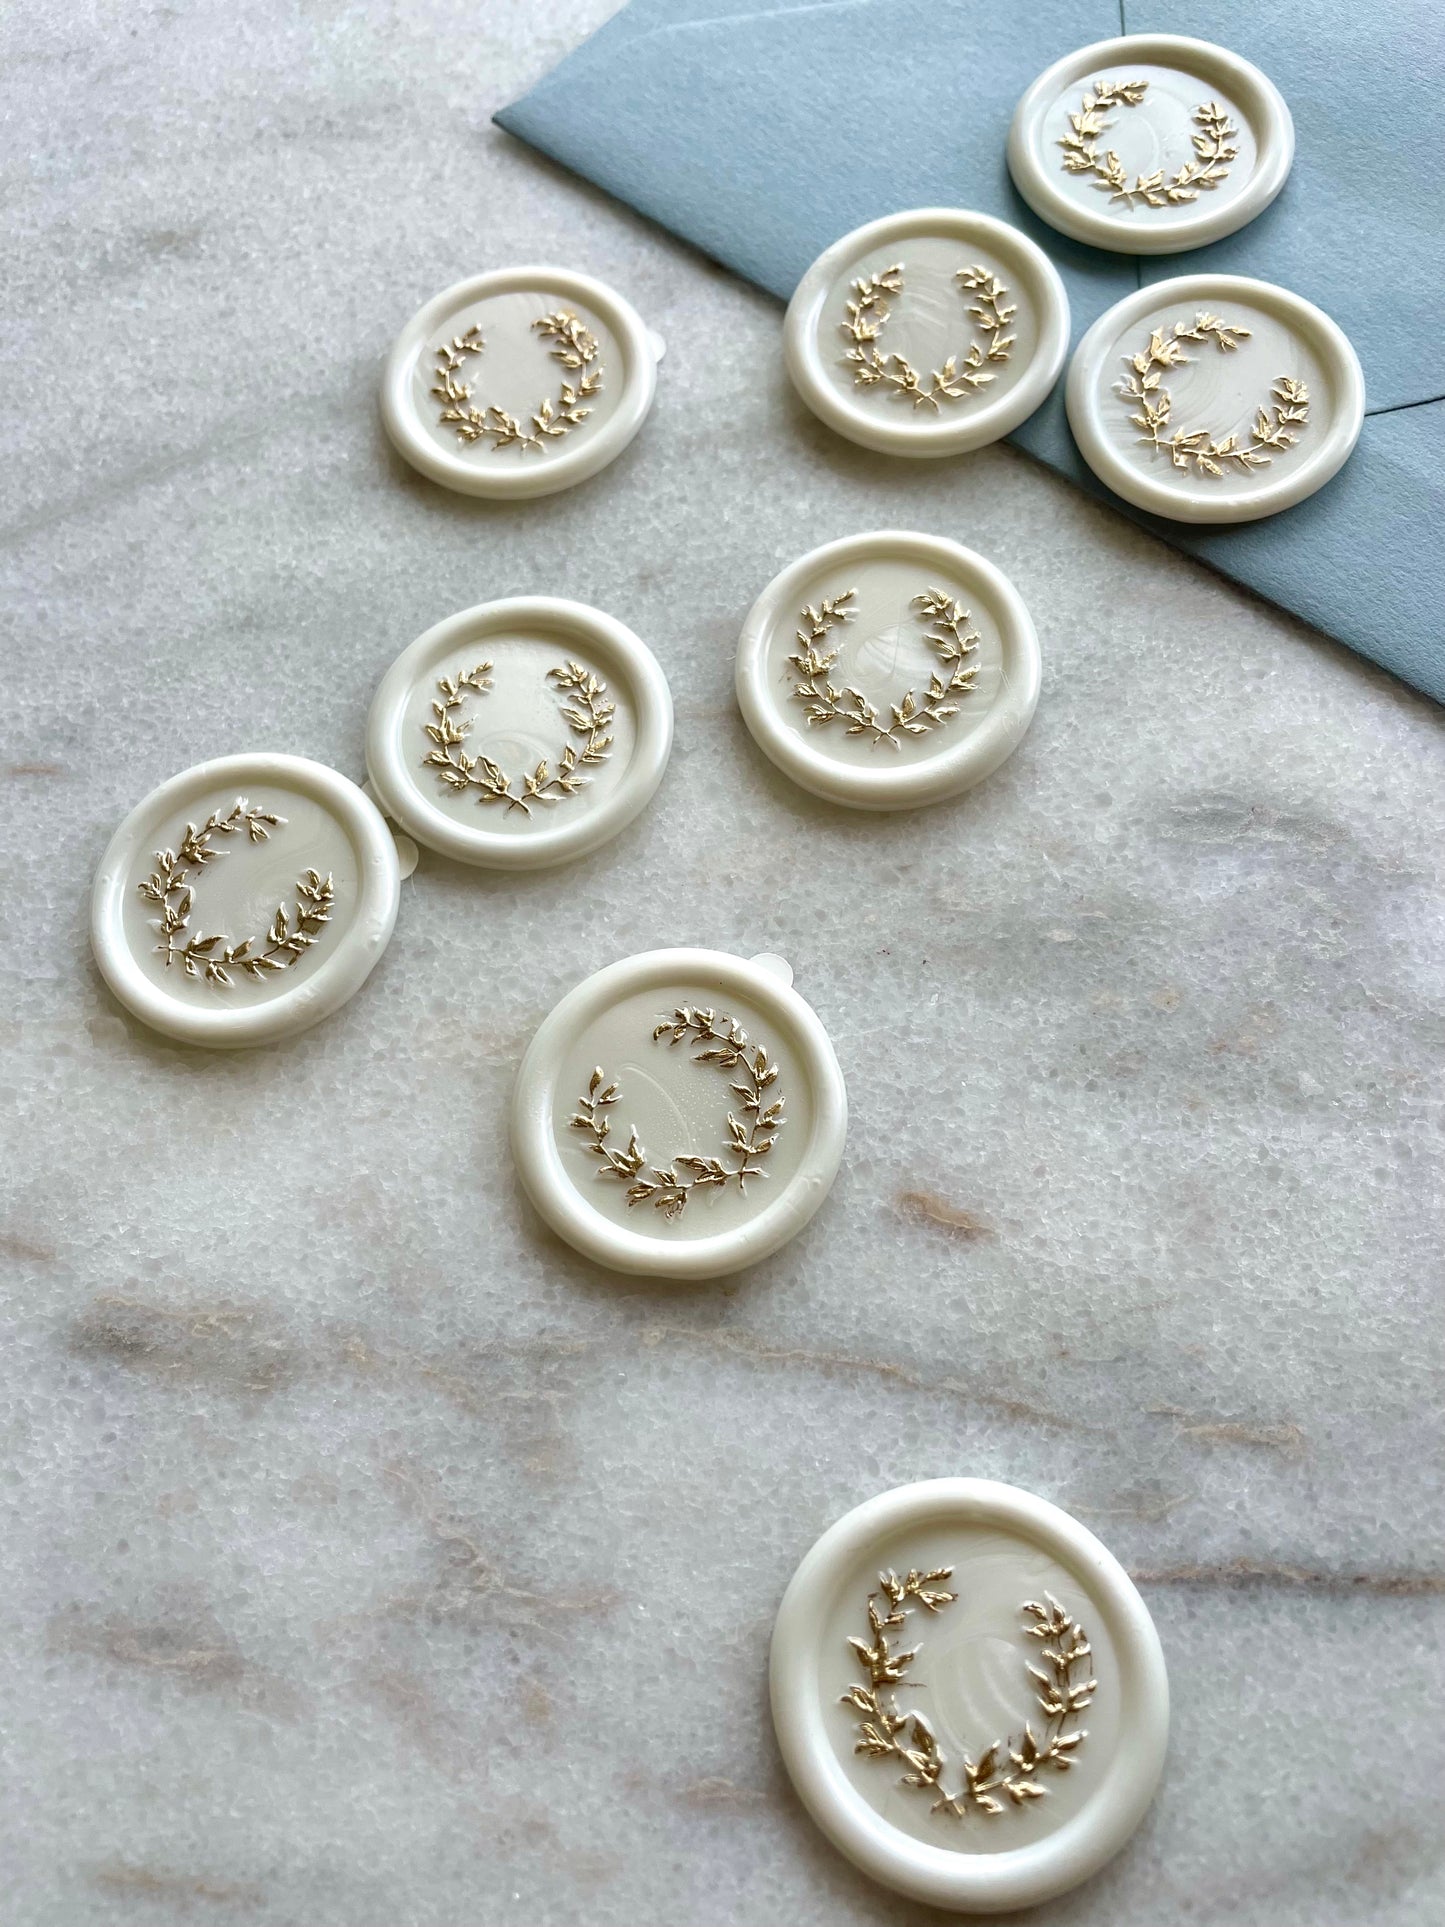 Laurel Wreath Wax Seal with Gold Accent -Self Adhesive wax seal Sticker- Floral Wreath Premade Wax Seal - Megan Bruce Designs